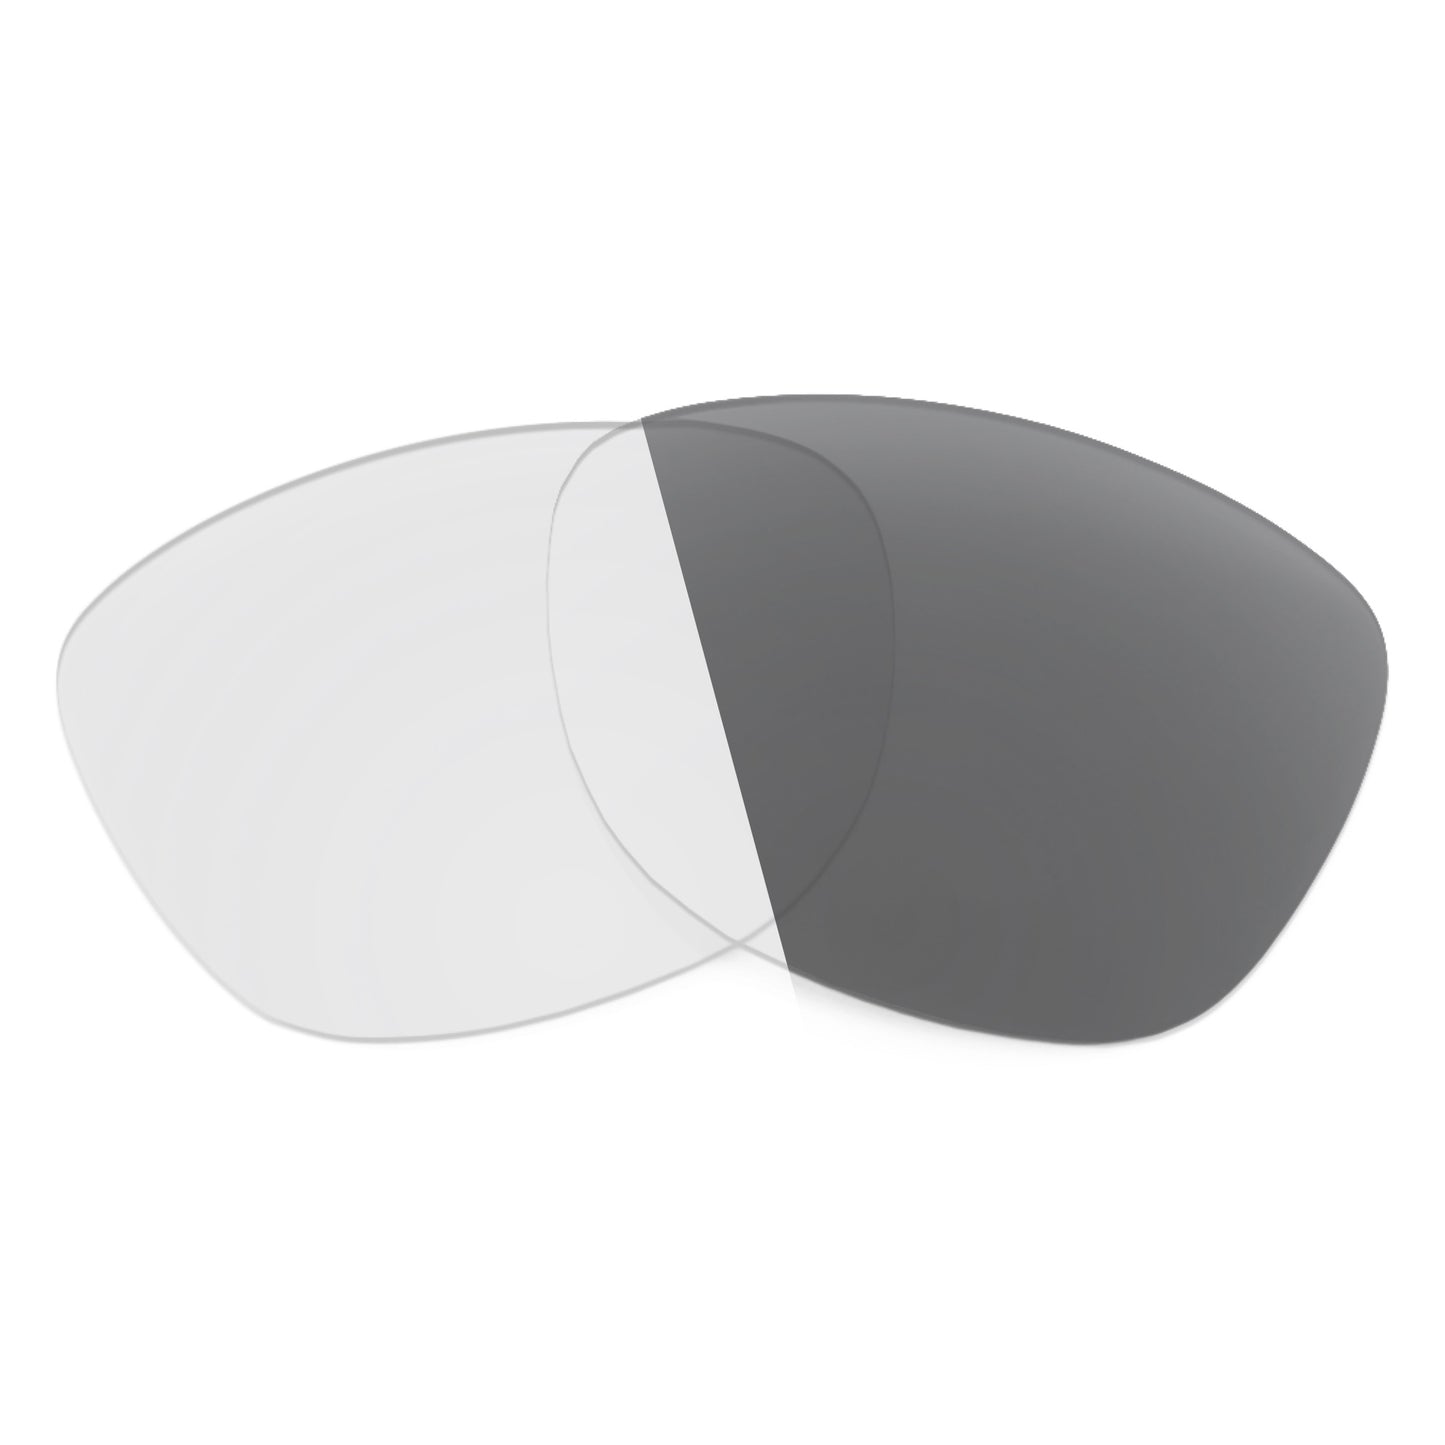 Revant replacement lenses for Ray-Ban Iris RB4471 54mm Non-Polarized Adapt Gray Photochromic